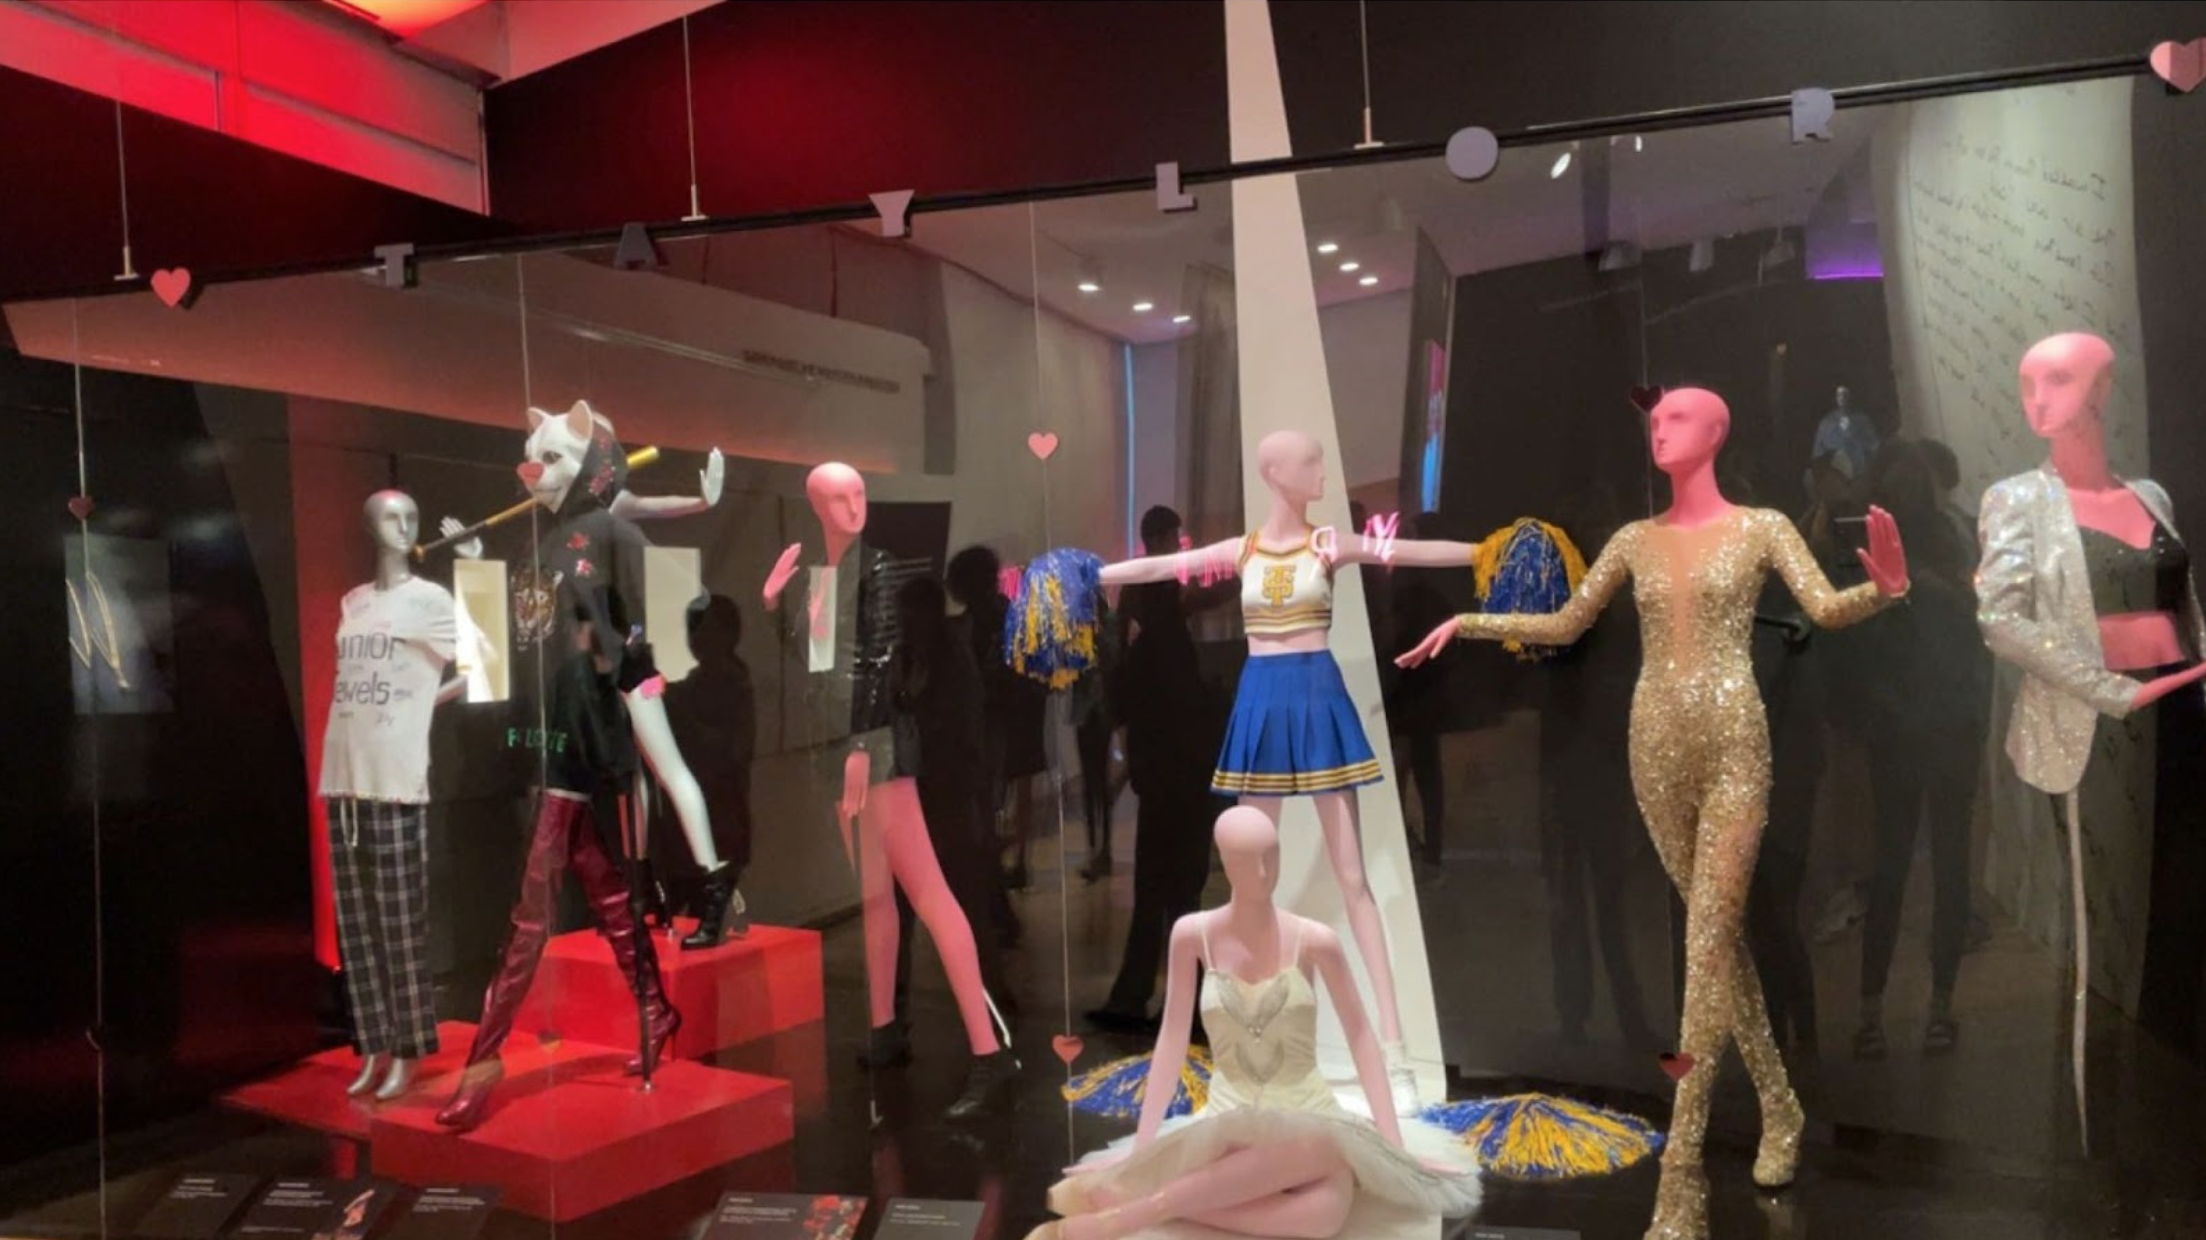 Taylor Swift Exhibit at MAD (Museum of Art and Design) by Catherine P